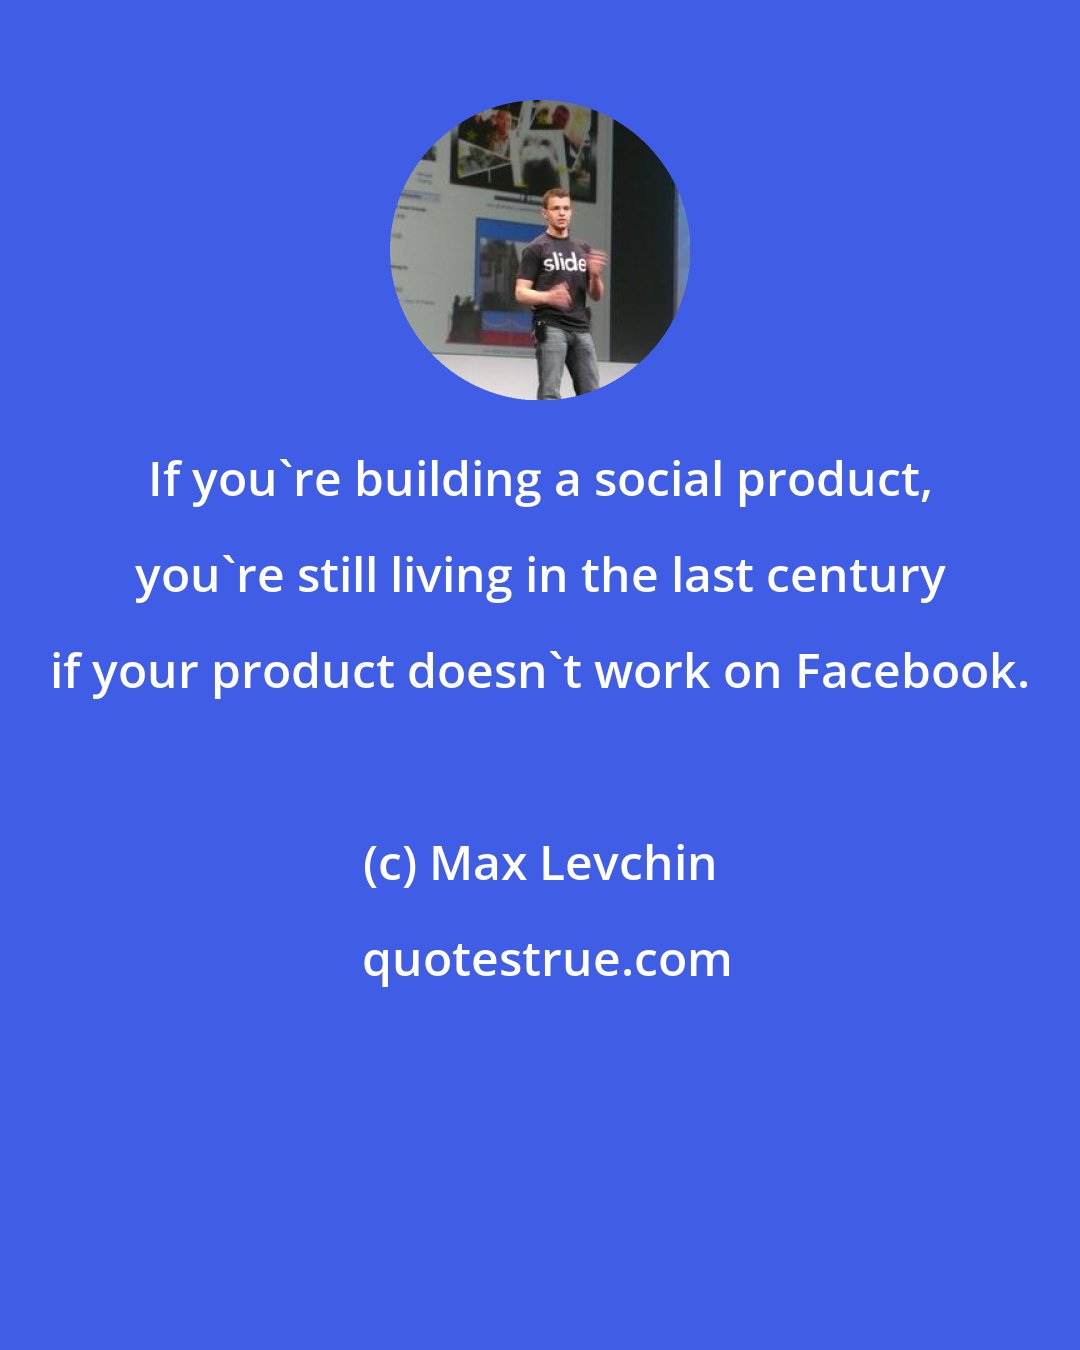 Max Levchin: If you're building a social product, you're still living in the last century if your product doesn't work on Facebook.